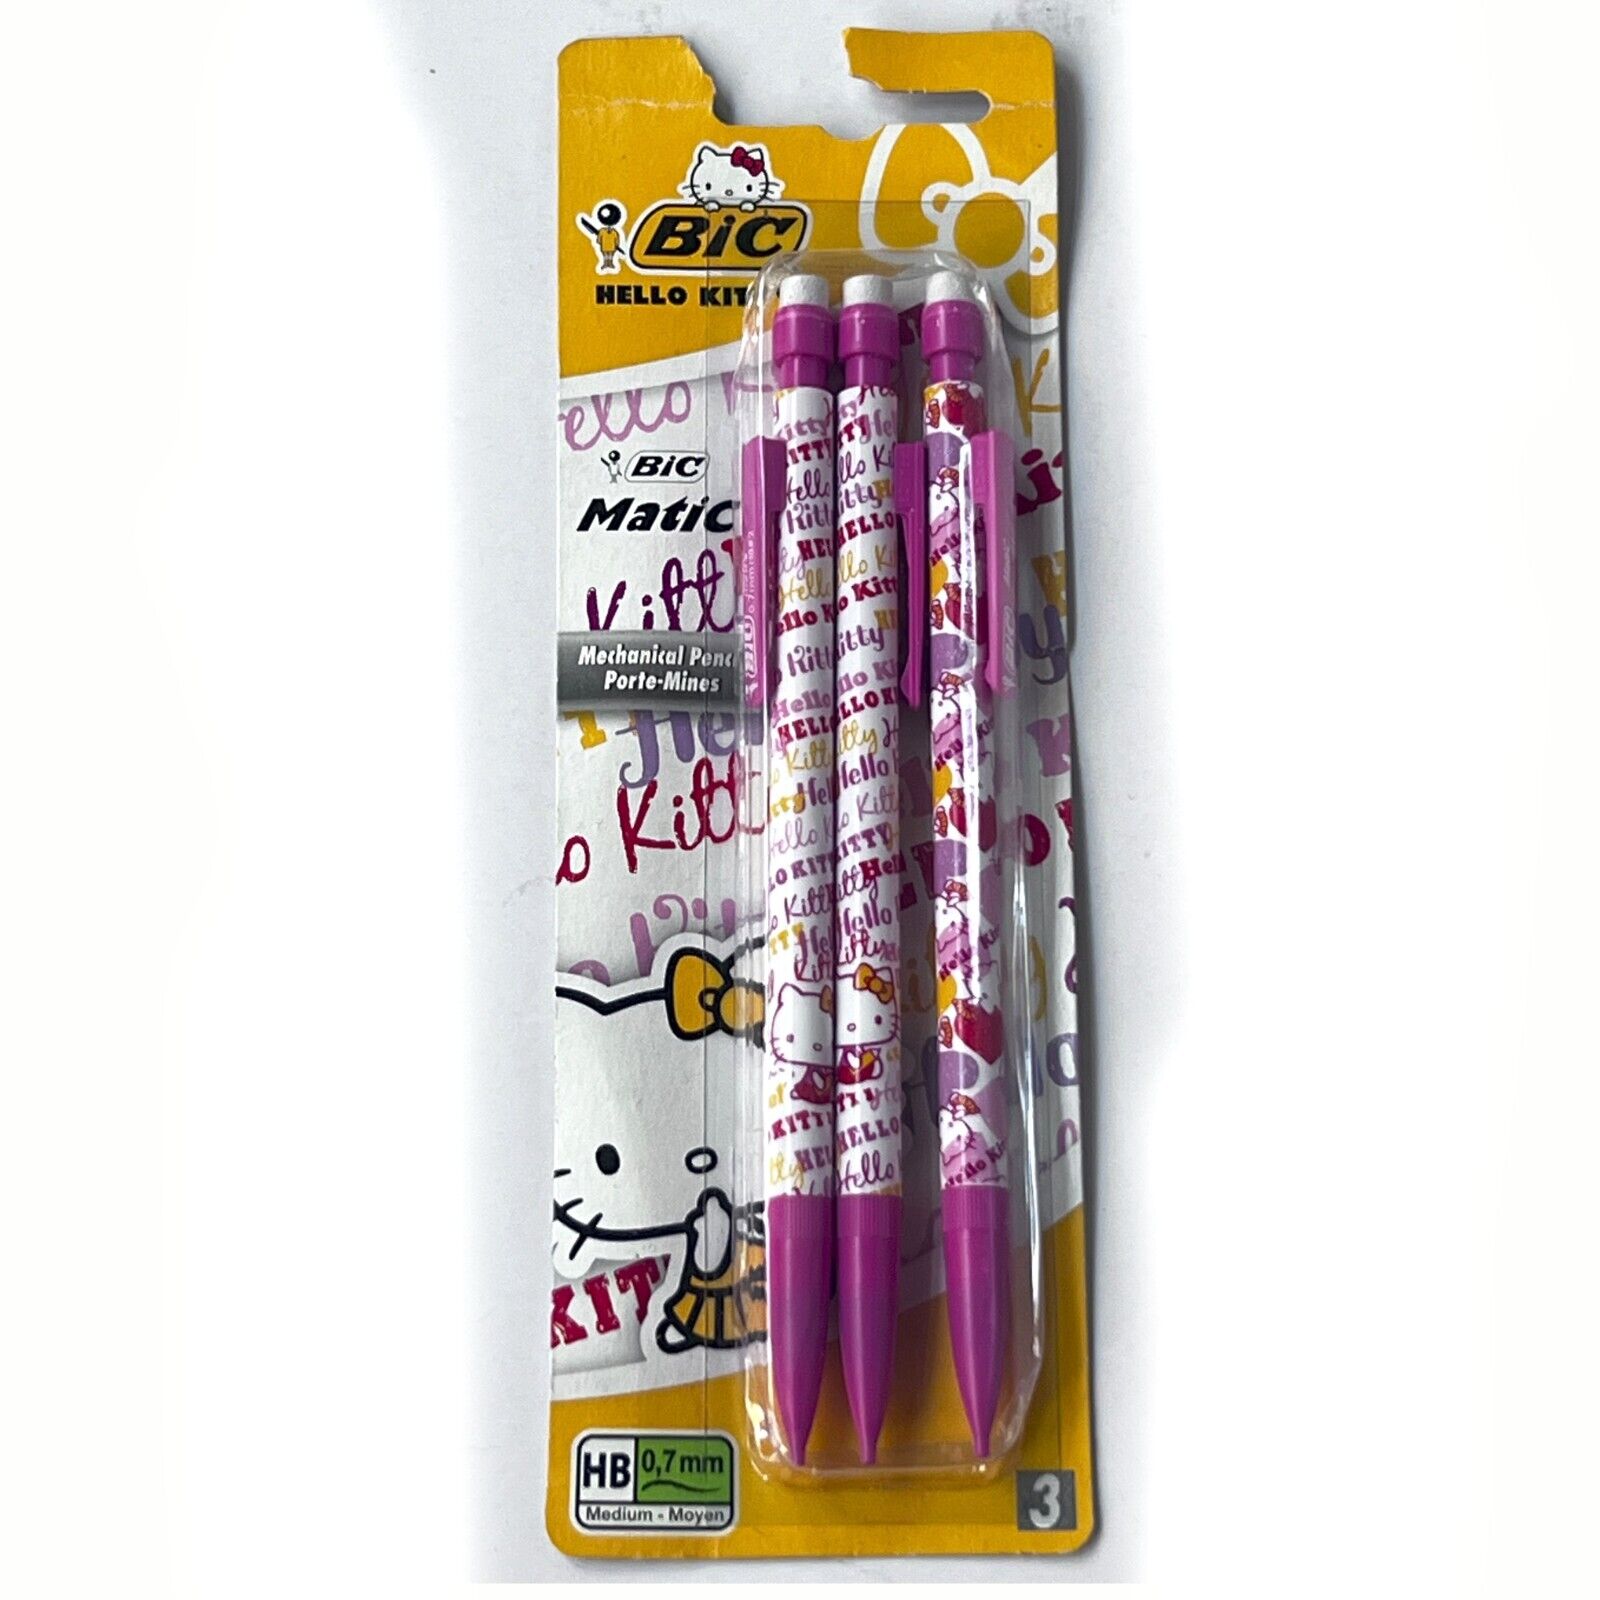 Bic Hello Kitty Matic mechanical pencil .7 HP Medium (Pack of 3) Made in France